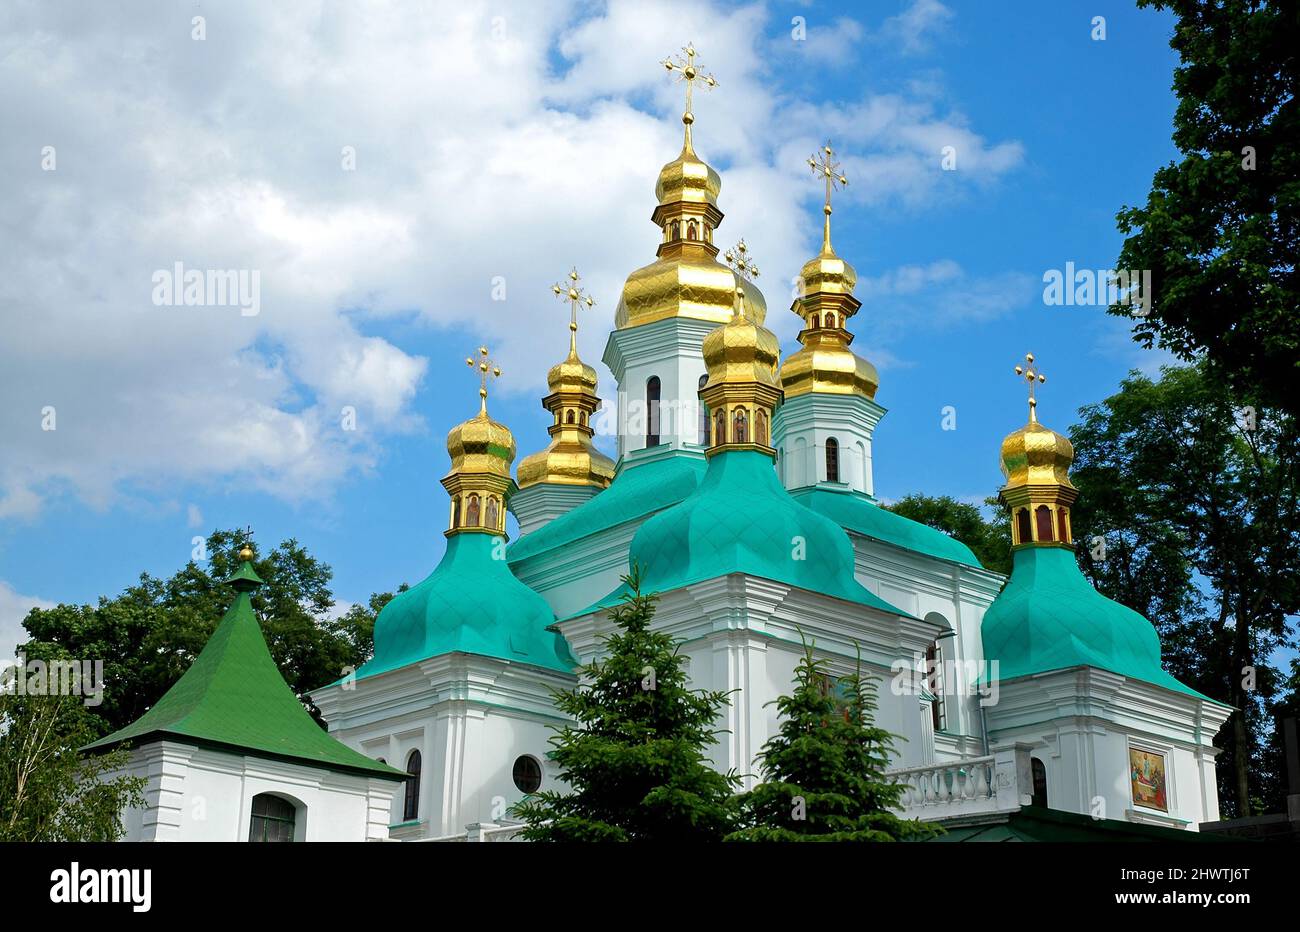 Kyiv or Kiev, Ukraine: Church of the Nativity of the Virgin or Birth of the Mother of God Church at the Kyiv Pechersk Lavra or Monastery of the Caves. Stock Photo